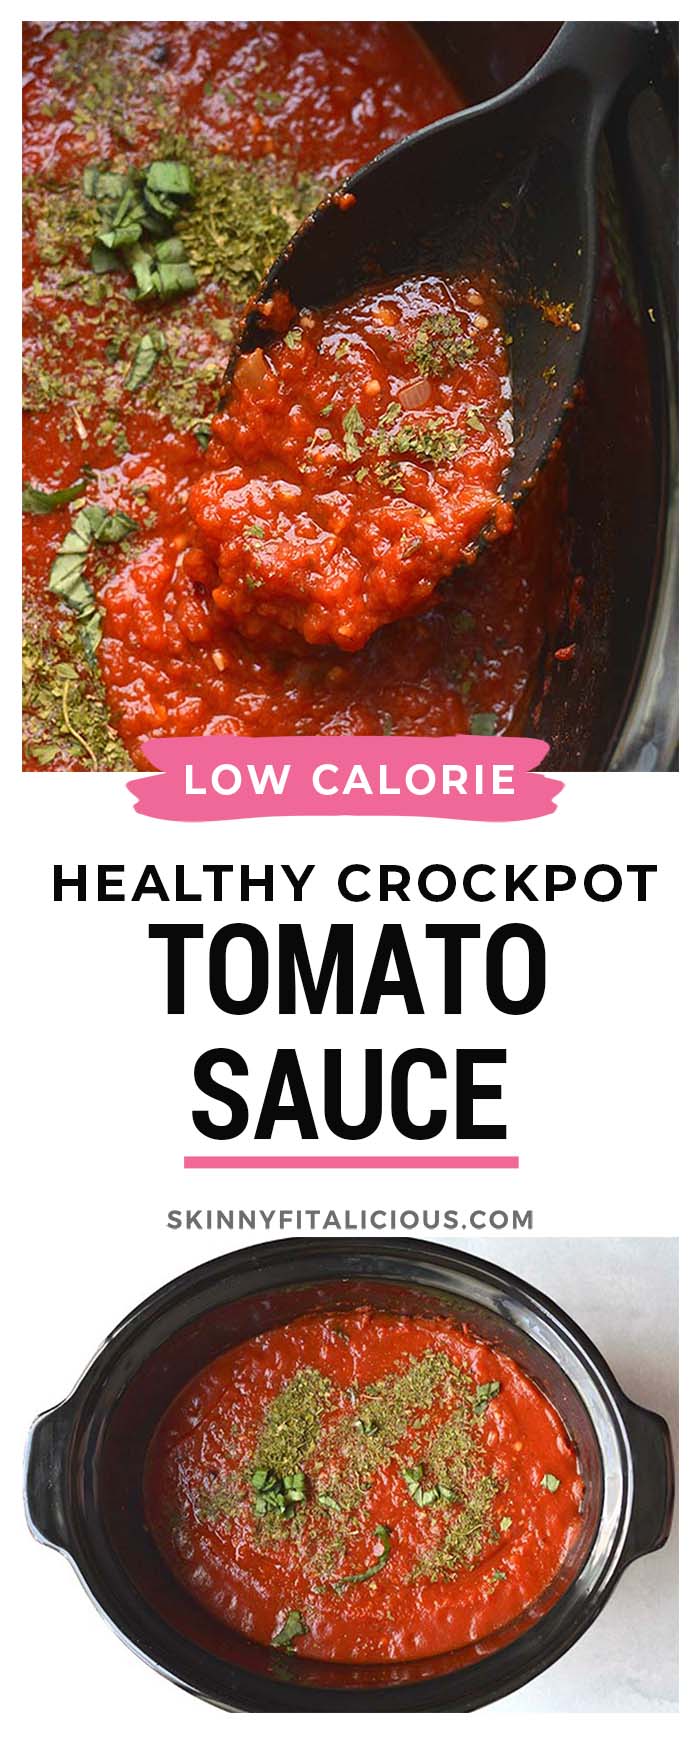 Healthy Crockpot Tomato Sauce is a low calorie pasta sauce. Made easy in a slow cooker, this sauce is perfect for a healthy pasta night! Low Calorie + Gluten Free + Paleo